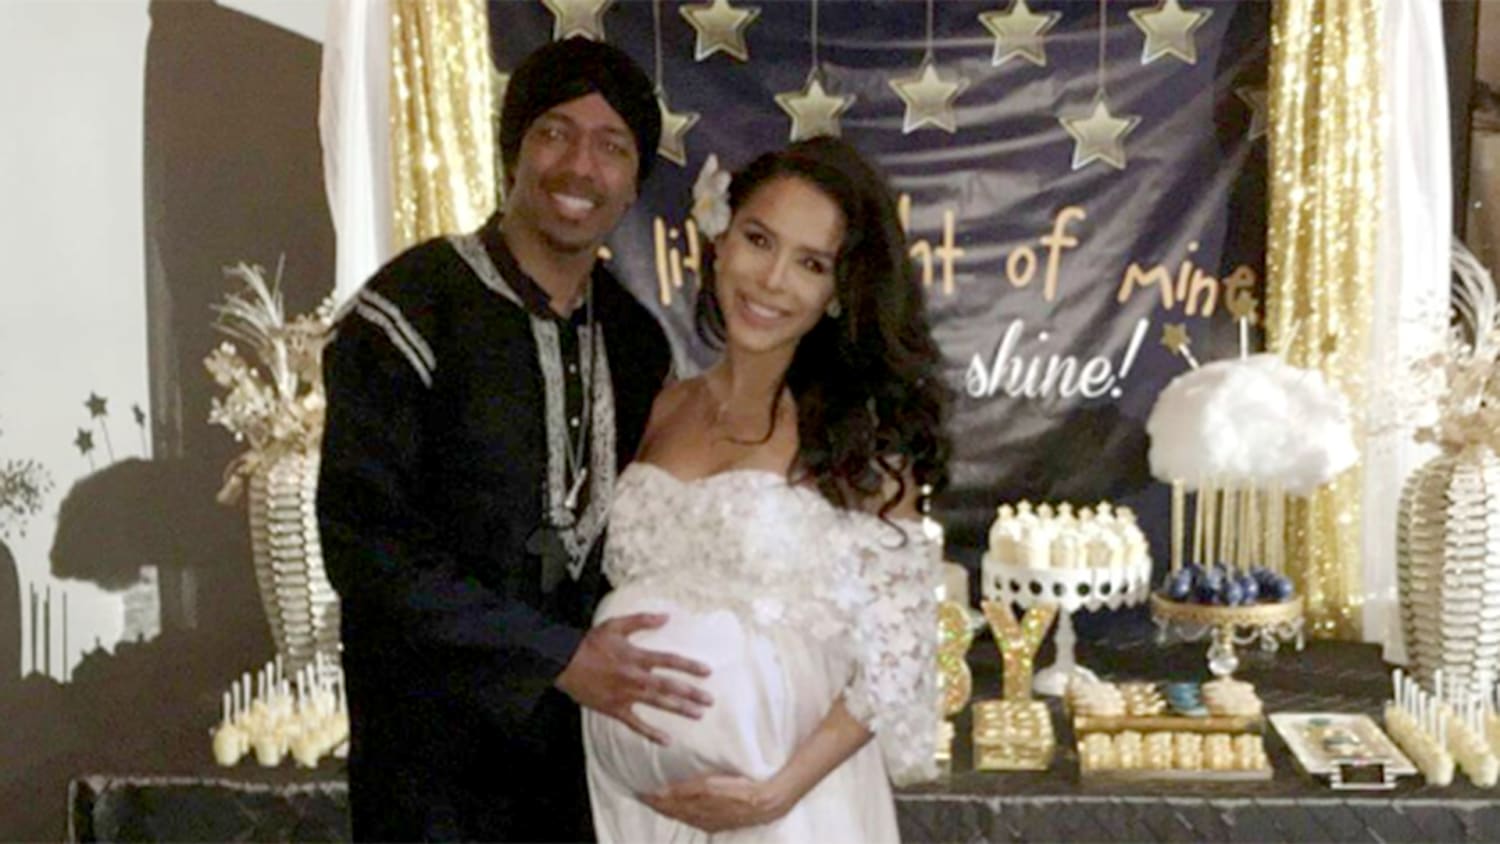 Nick Cannon welcomes son, Golden 'Sagon' Cannon, with Brittany Bell - TODAY.com